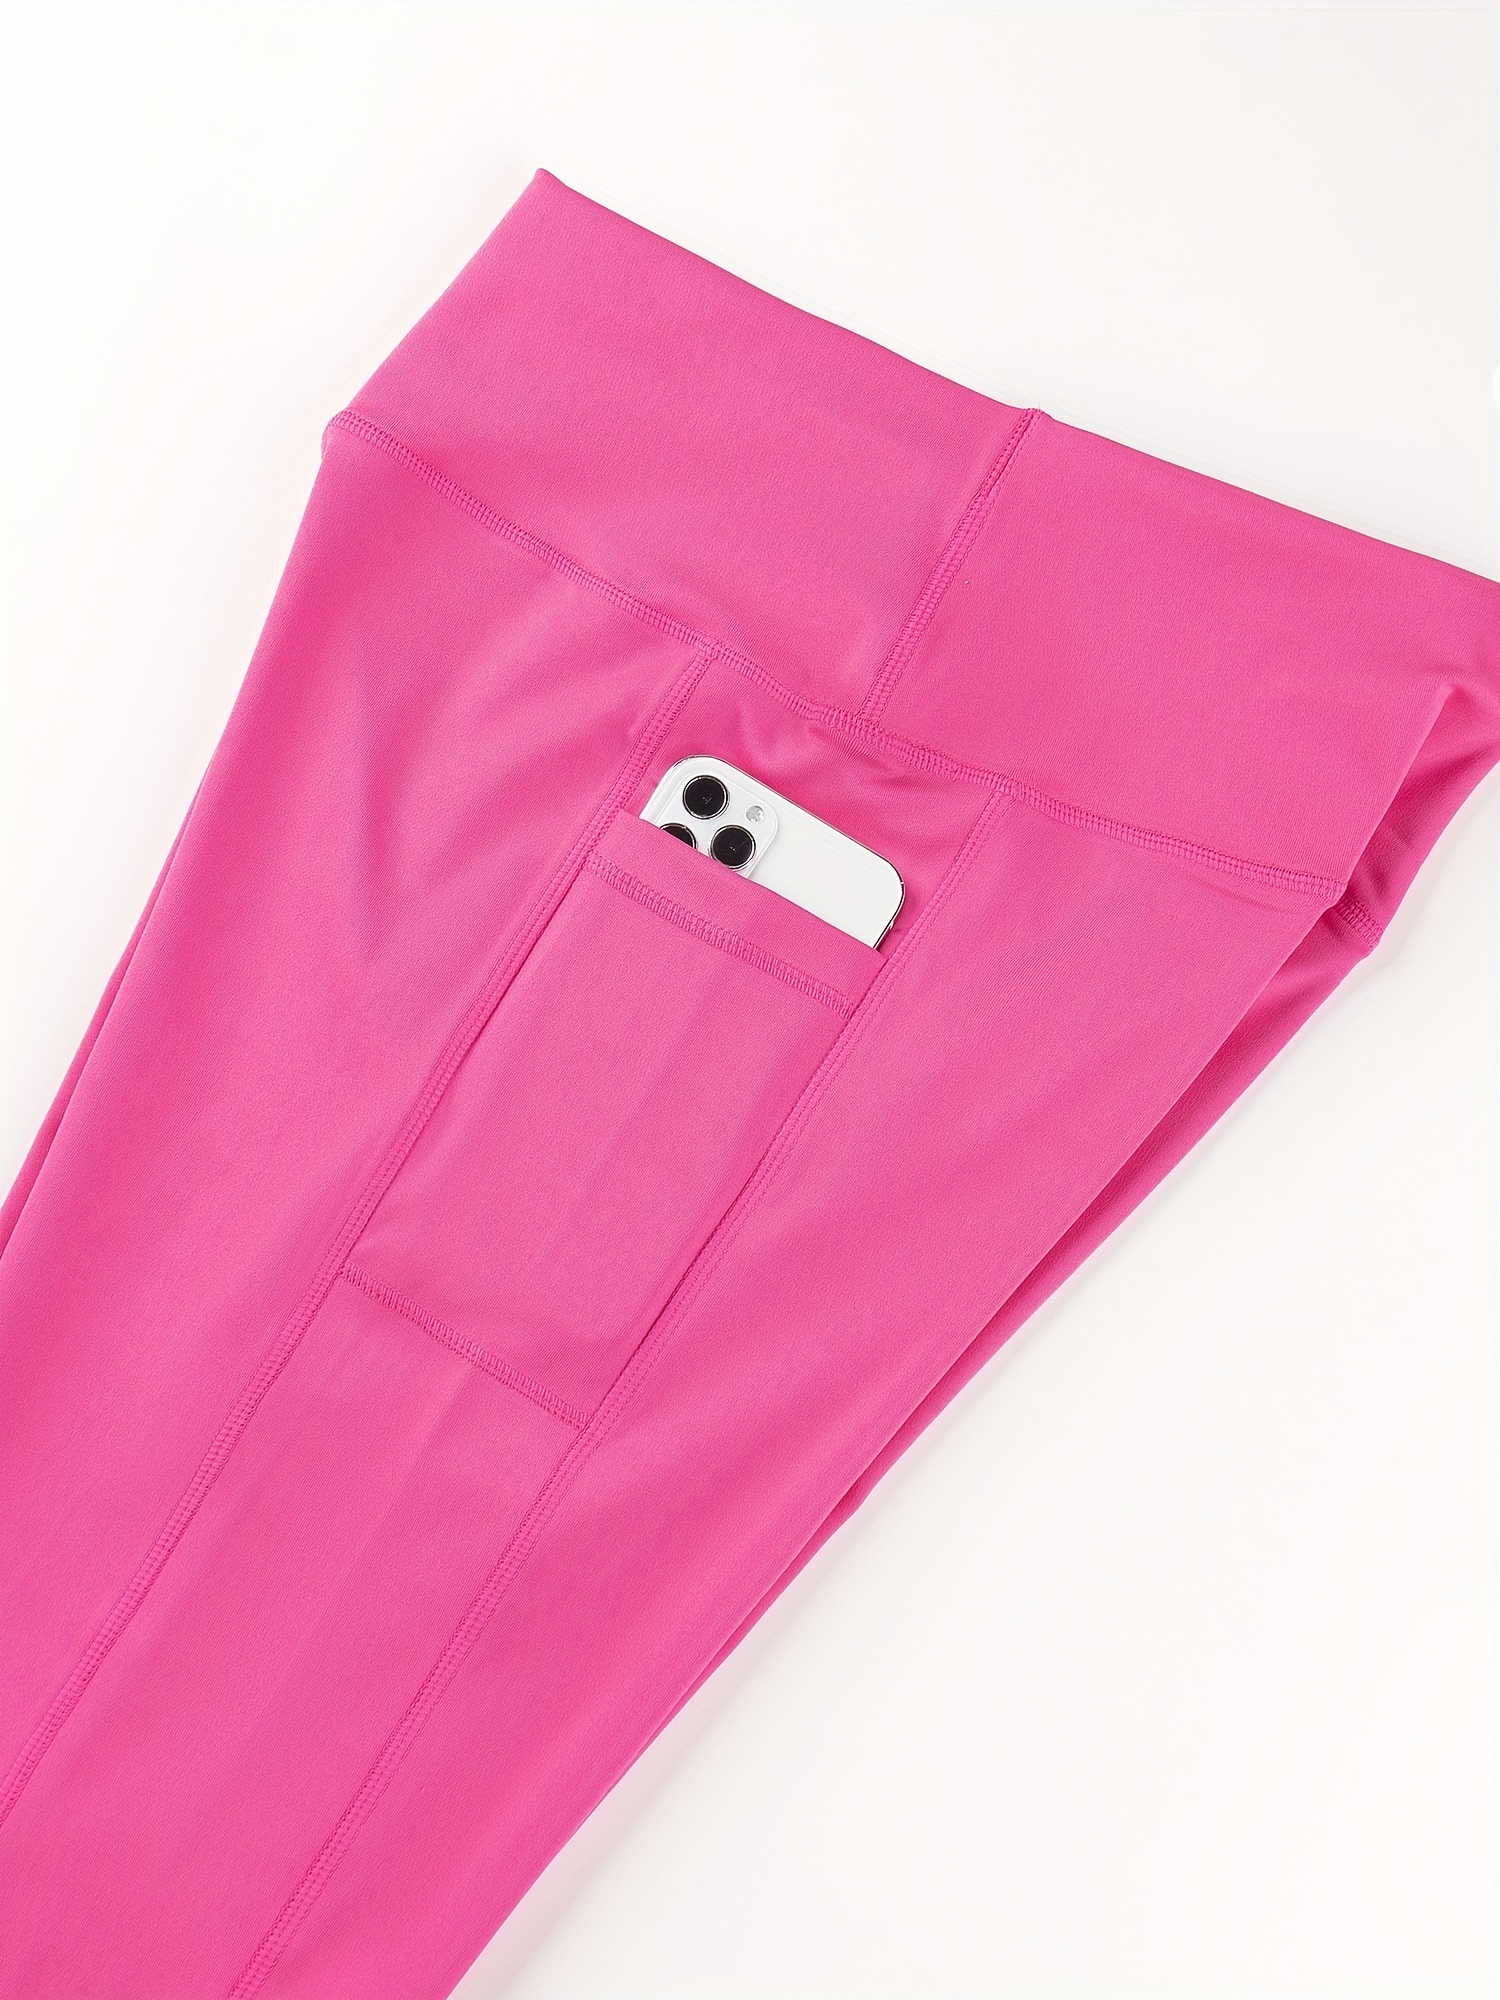 Women's Fitness Leggings with Phone Pocket - Pink Print